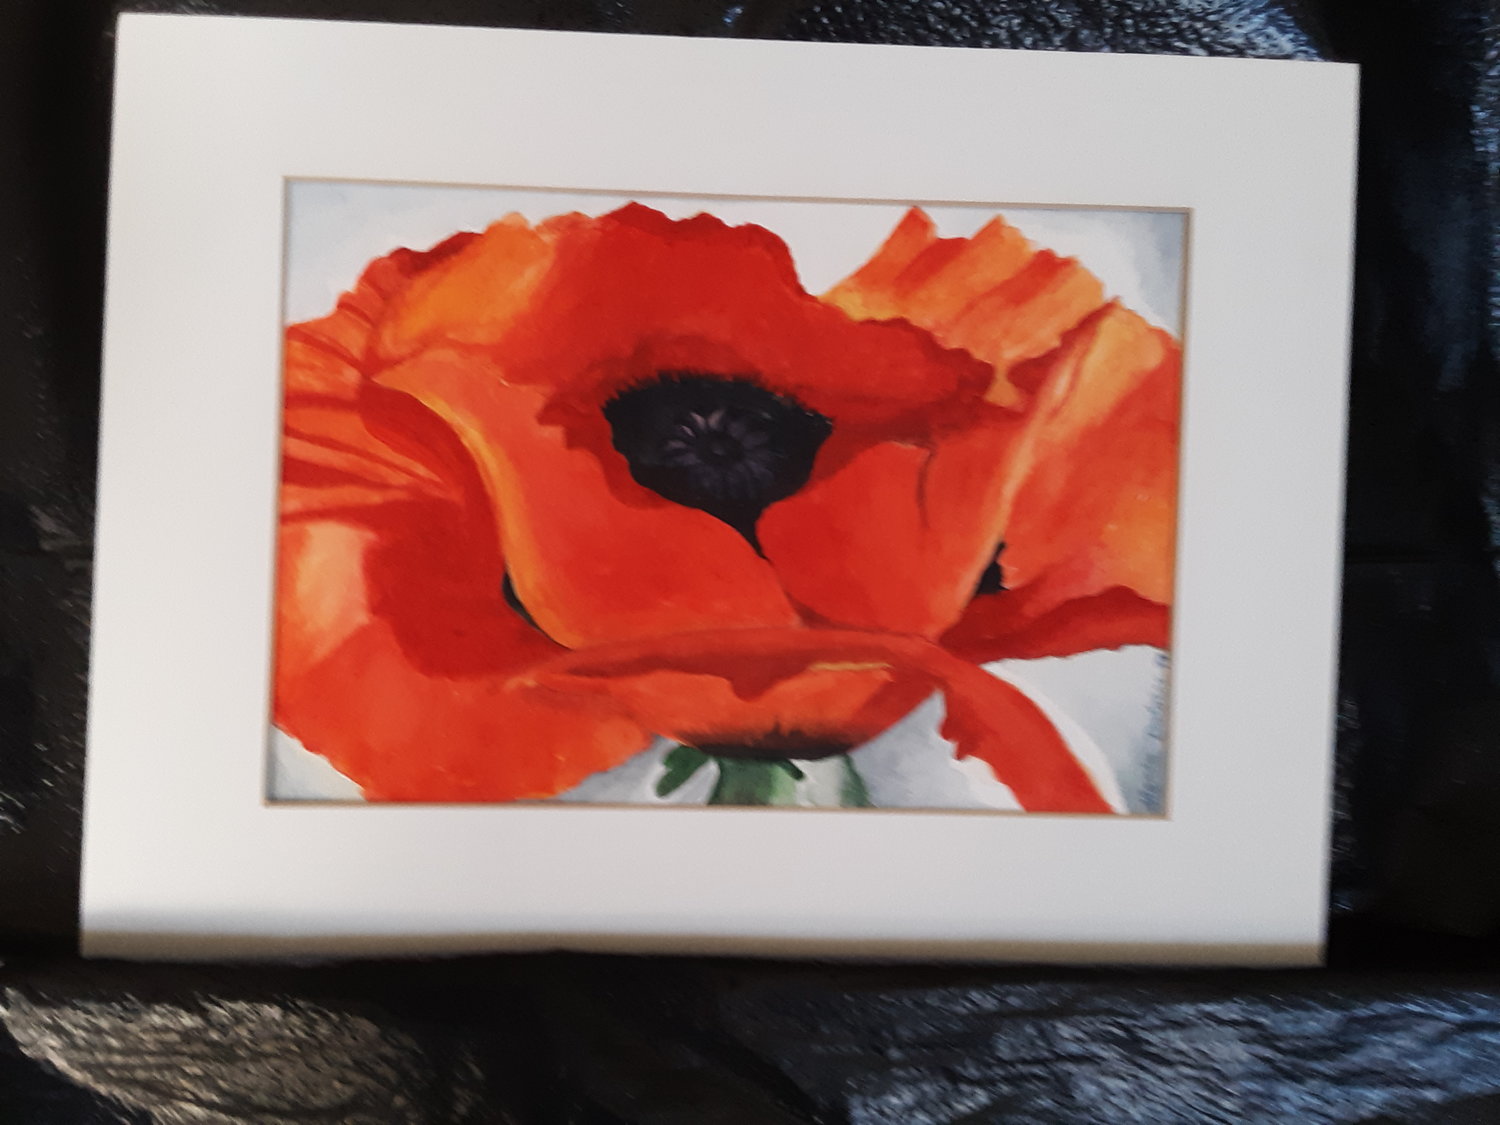 “Poppie,” 9-inch by 12-inch unframed watercolor, by Maria Dolores